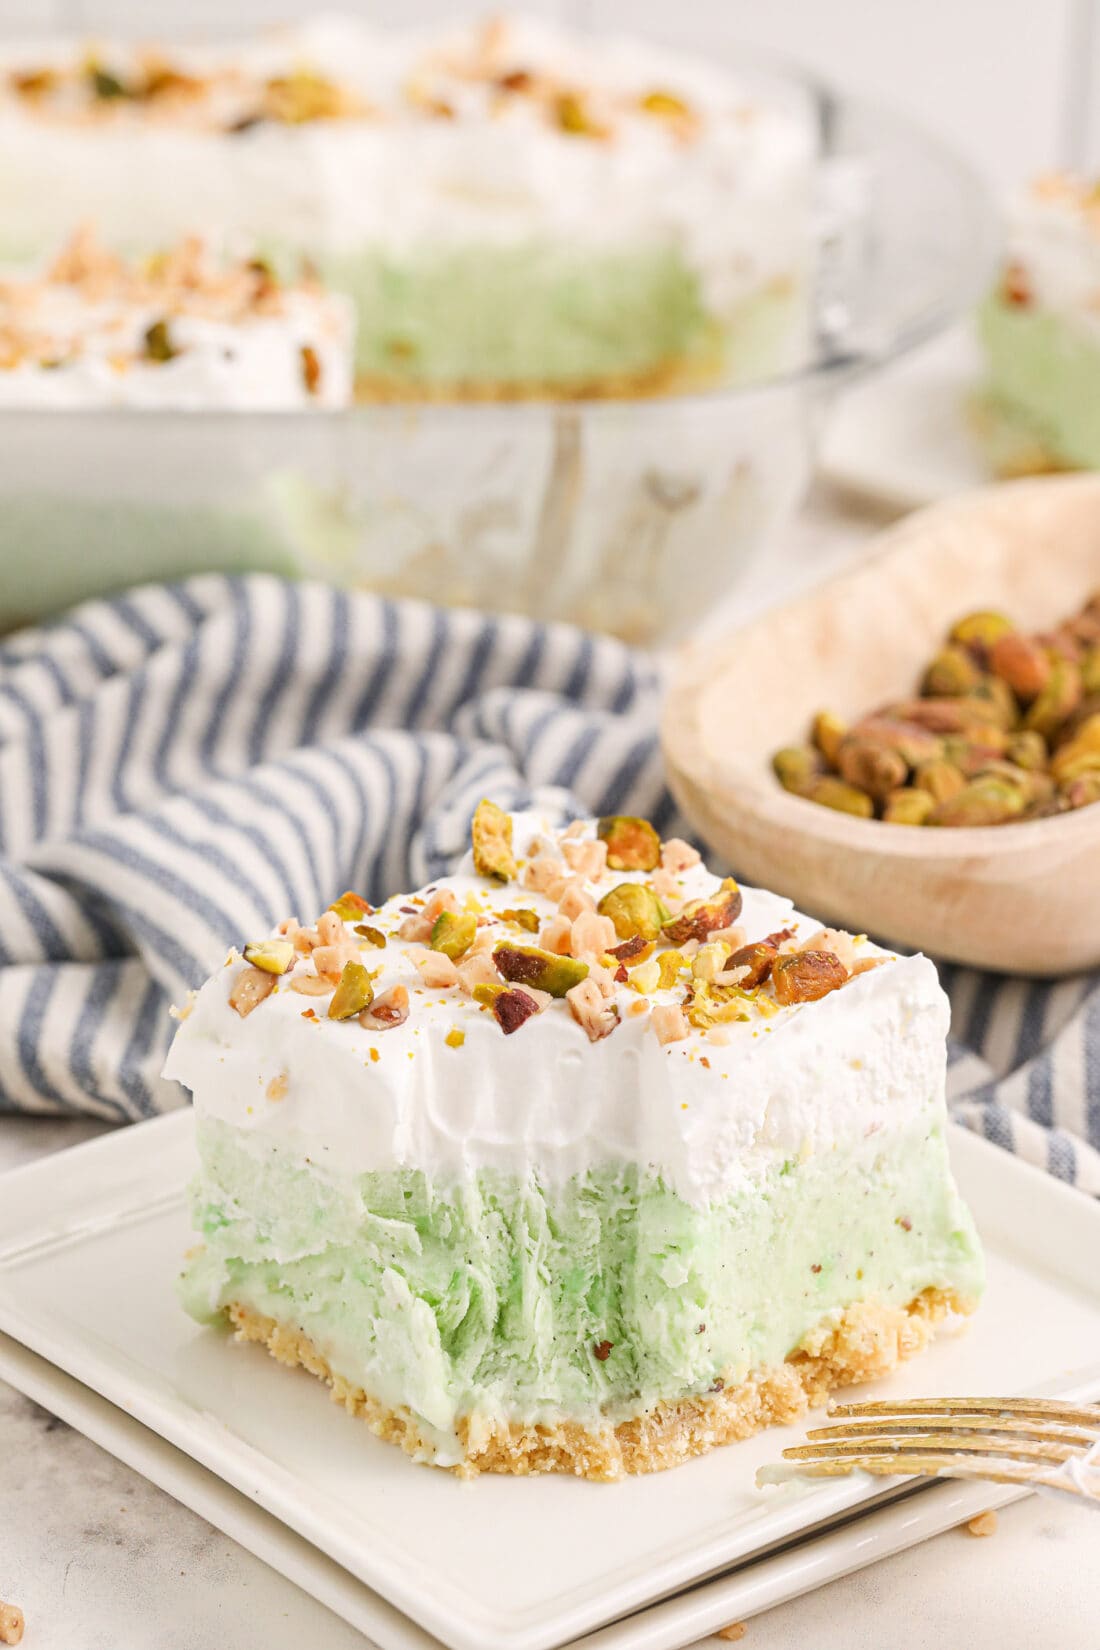 Slice of Pistachio Ice Cream Cake on a plate with a bite removed